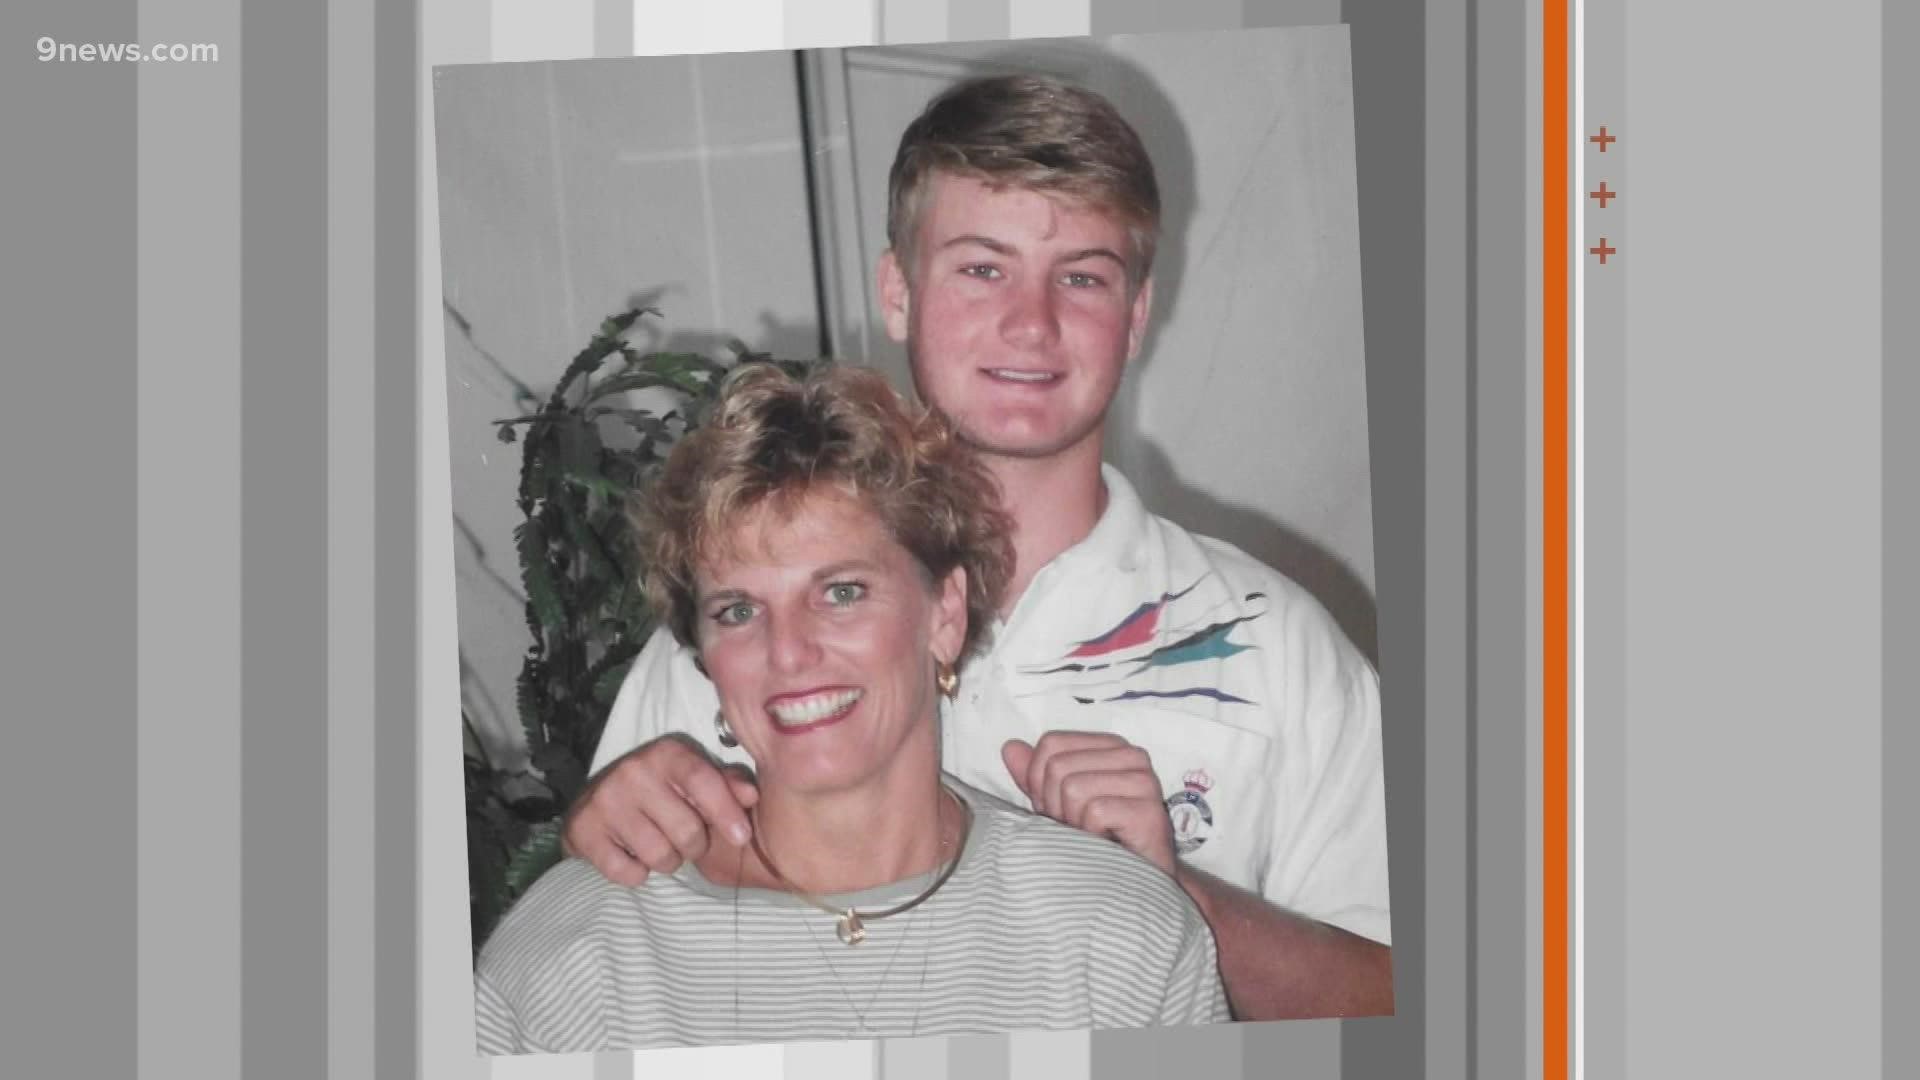 Colleen Malany lost her son to suicide in 1994. Soon after she started JKB, a group aimed at helping prevent teen suicide.